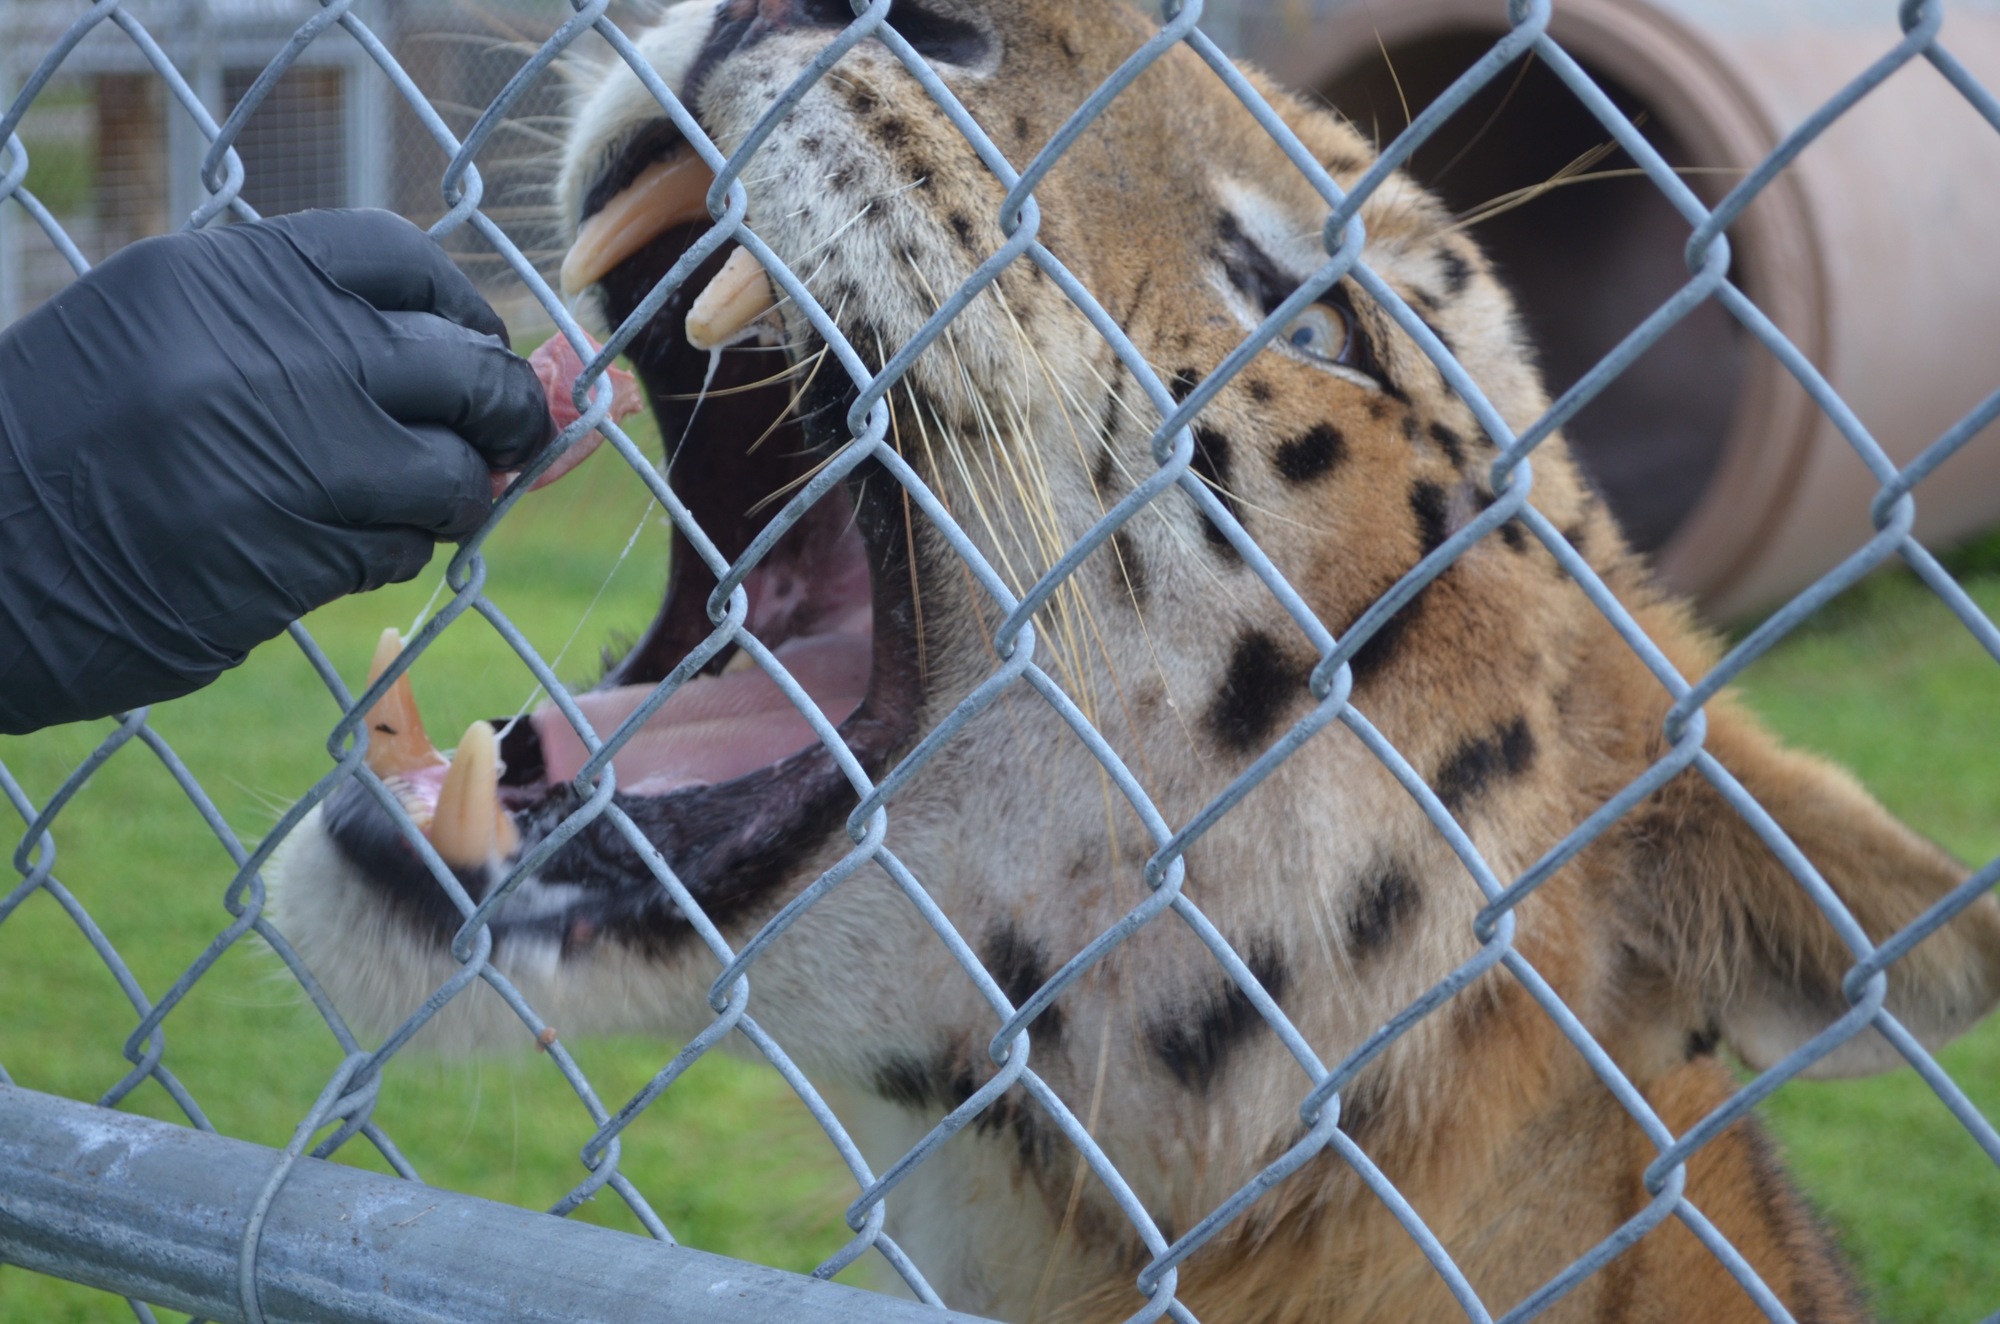 Rhaja gets excited just before being fed raw meat at Big Cat Habitat.